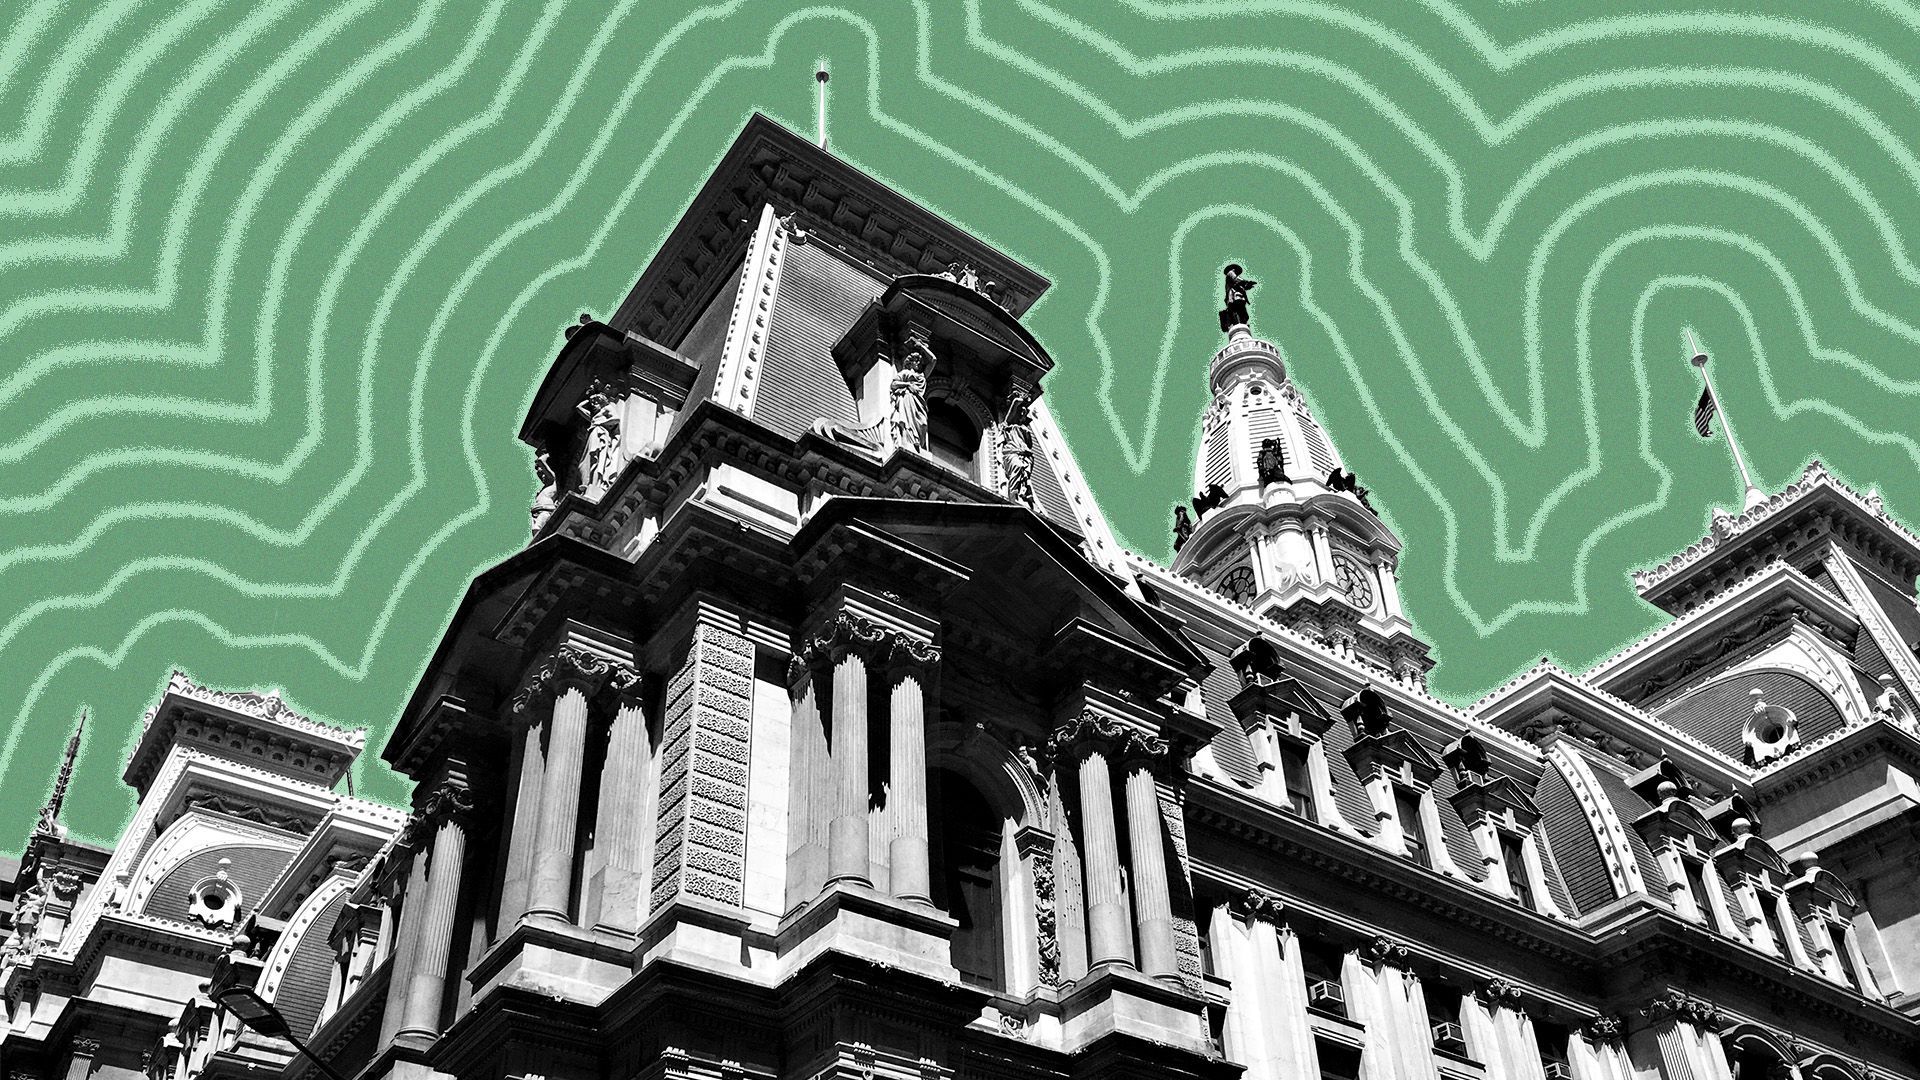 Illustration of Philadelphia City Hall with lines radiating from it.